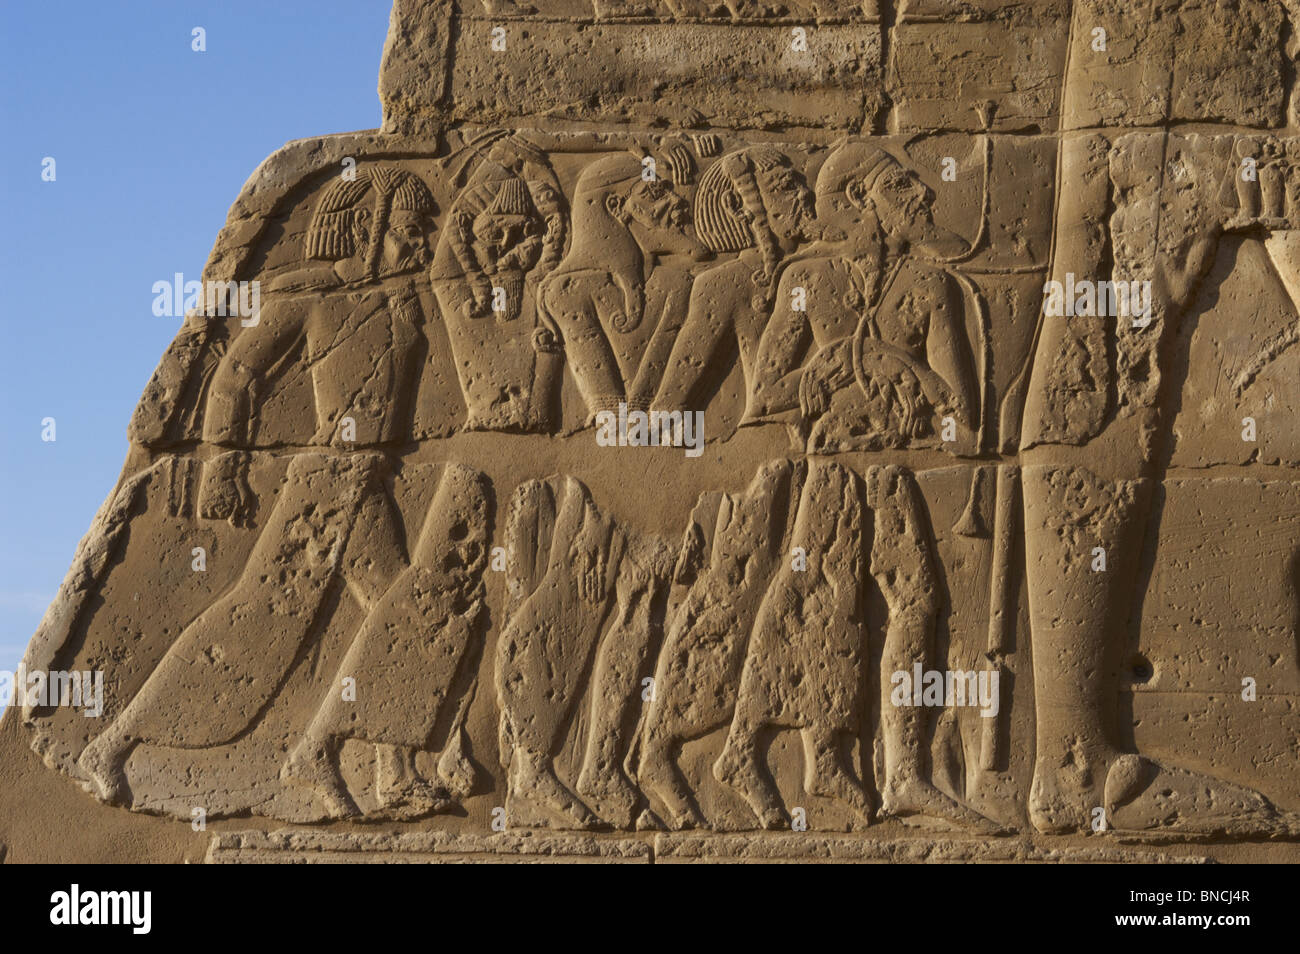 Temple of Ramses III. Relief depicting prisoners of war at the feet of Pharaoh, represented a larger size. Stock Photo